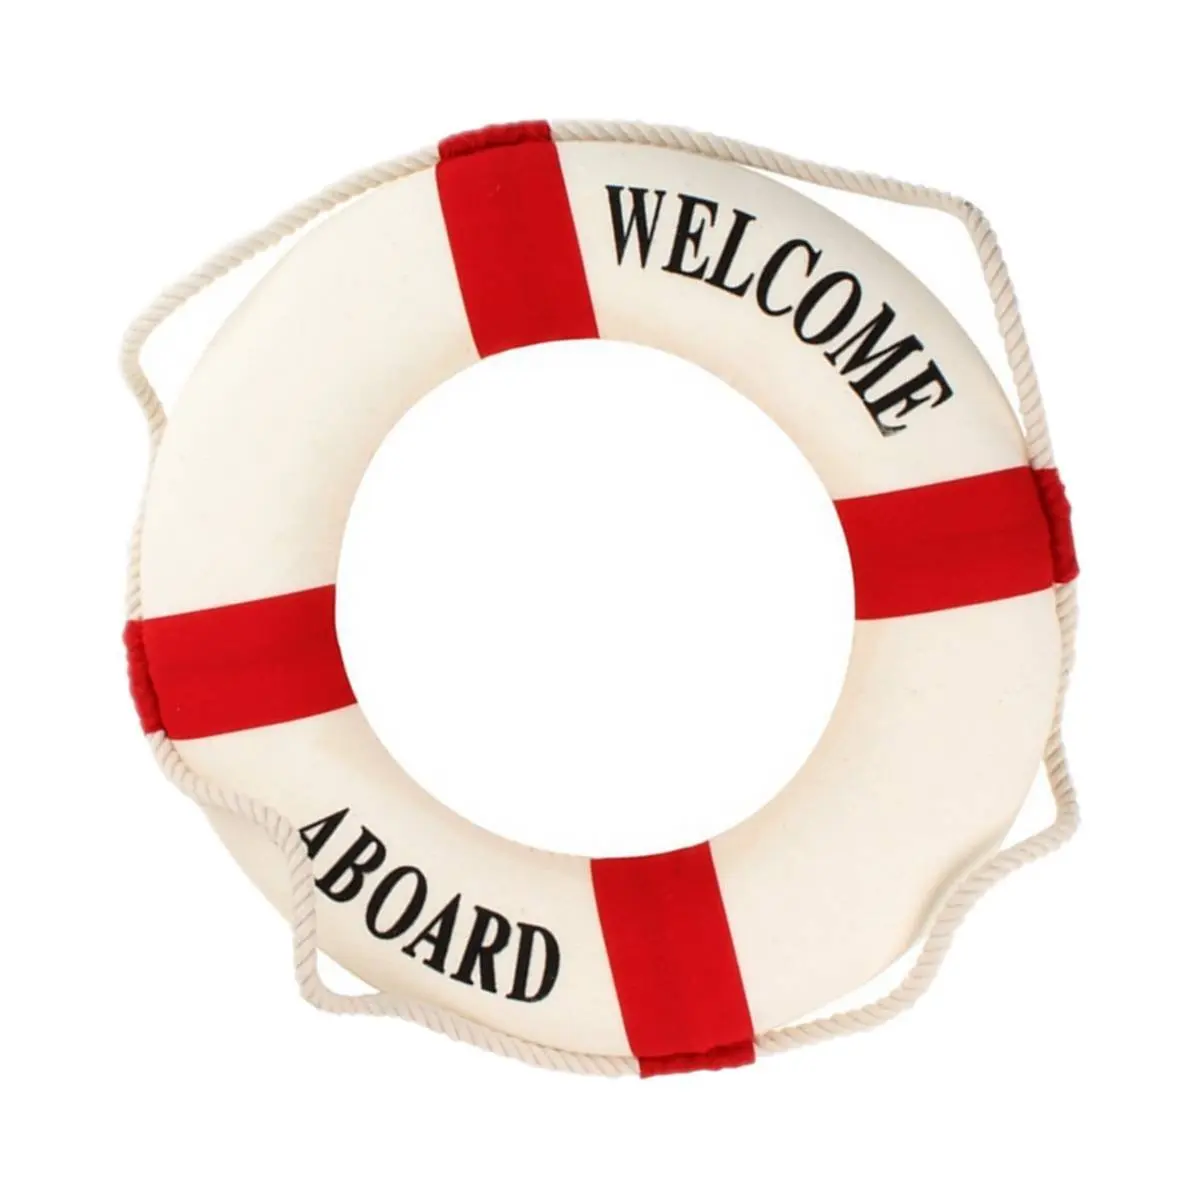 Details about   Welcome Aboard Nautical Life Ring Lifebuoy Boat Wall Hanging Home Bar Decor J 